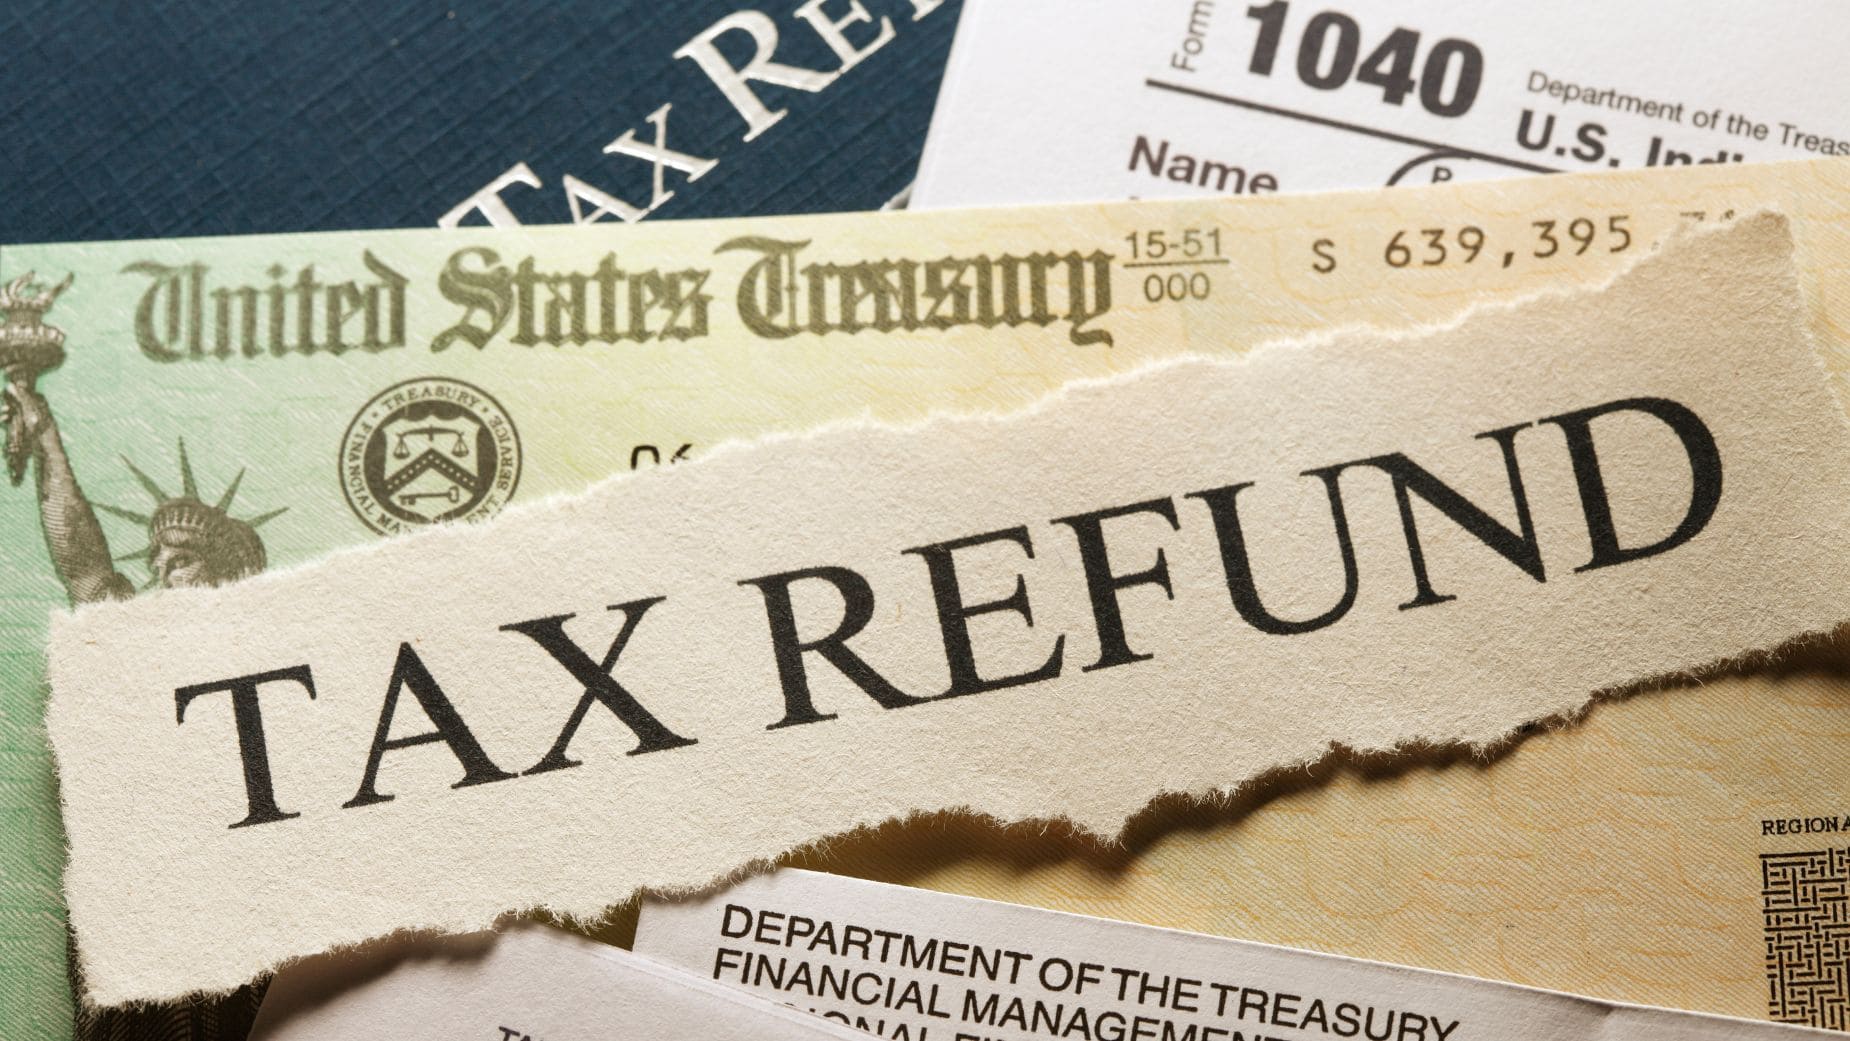 The Tax Refund will arrive earlier if you do this to send the Tax Return to the IRS